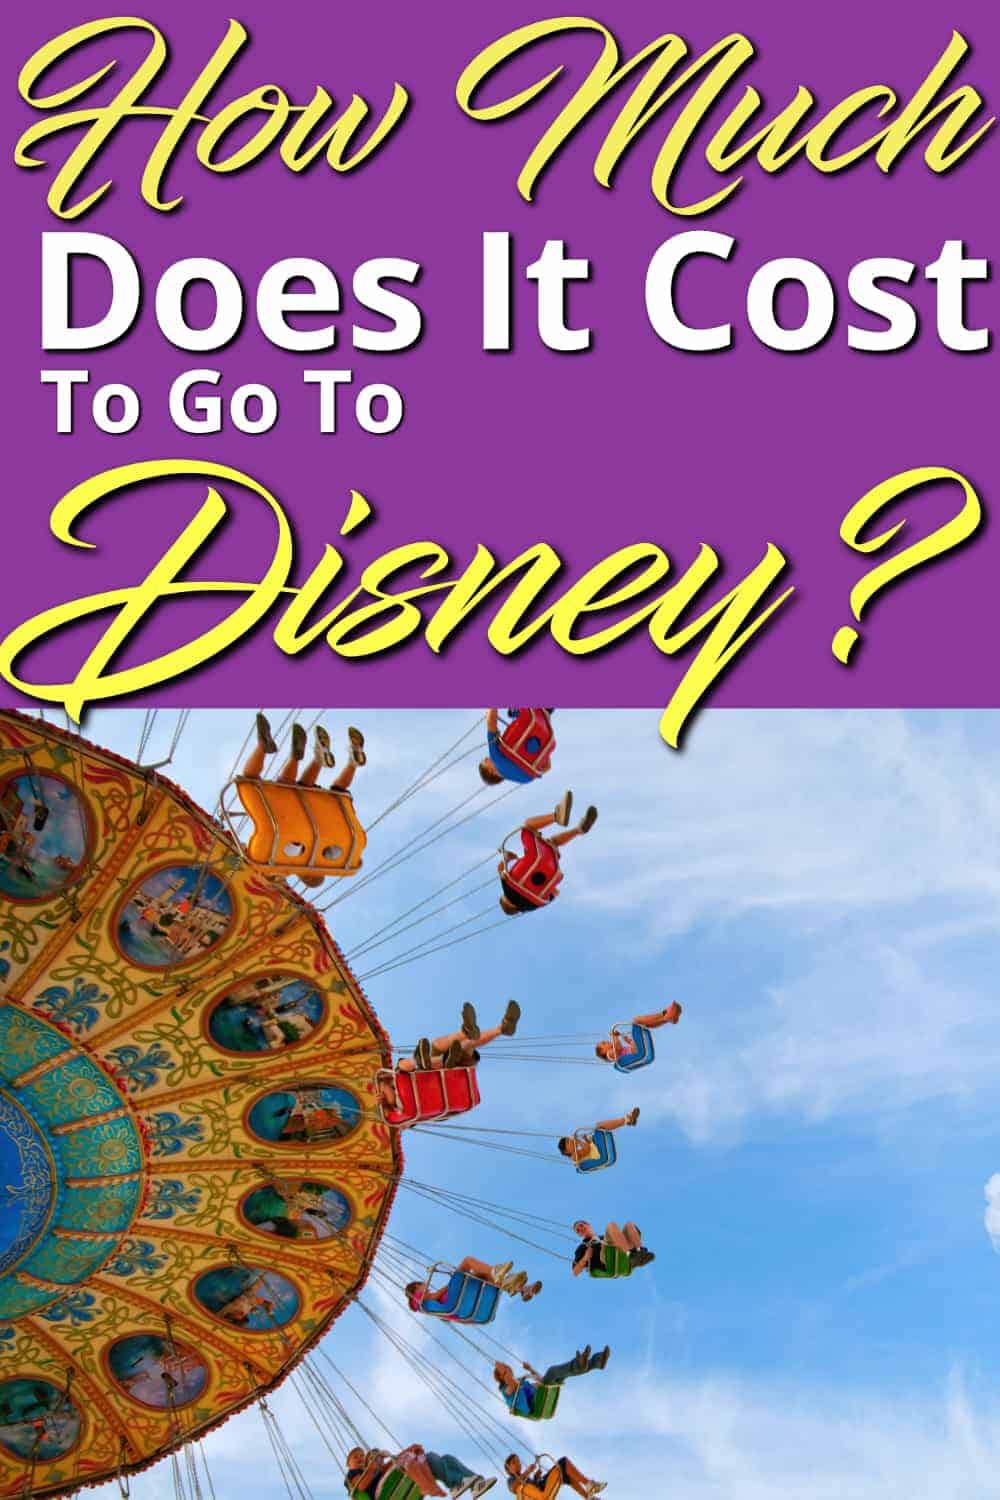 average cost of a trip to disney world for two